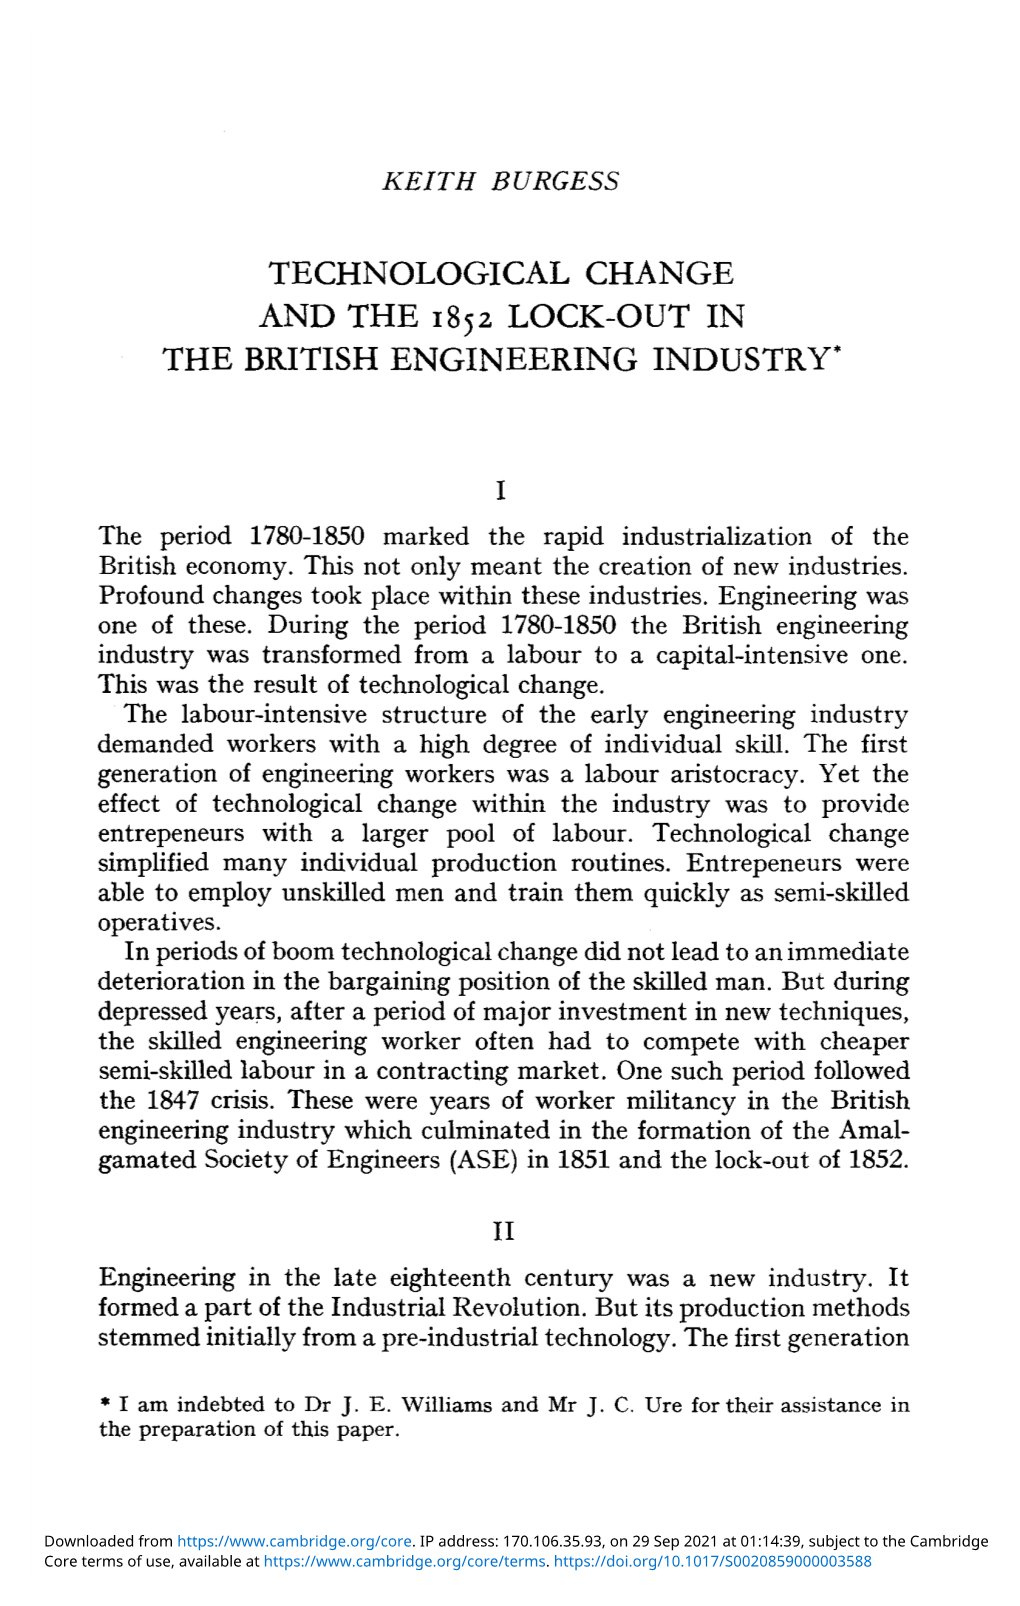 Technological Change and the 1852 Lock-Out in the British Engineering Industry*